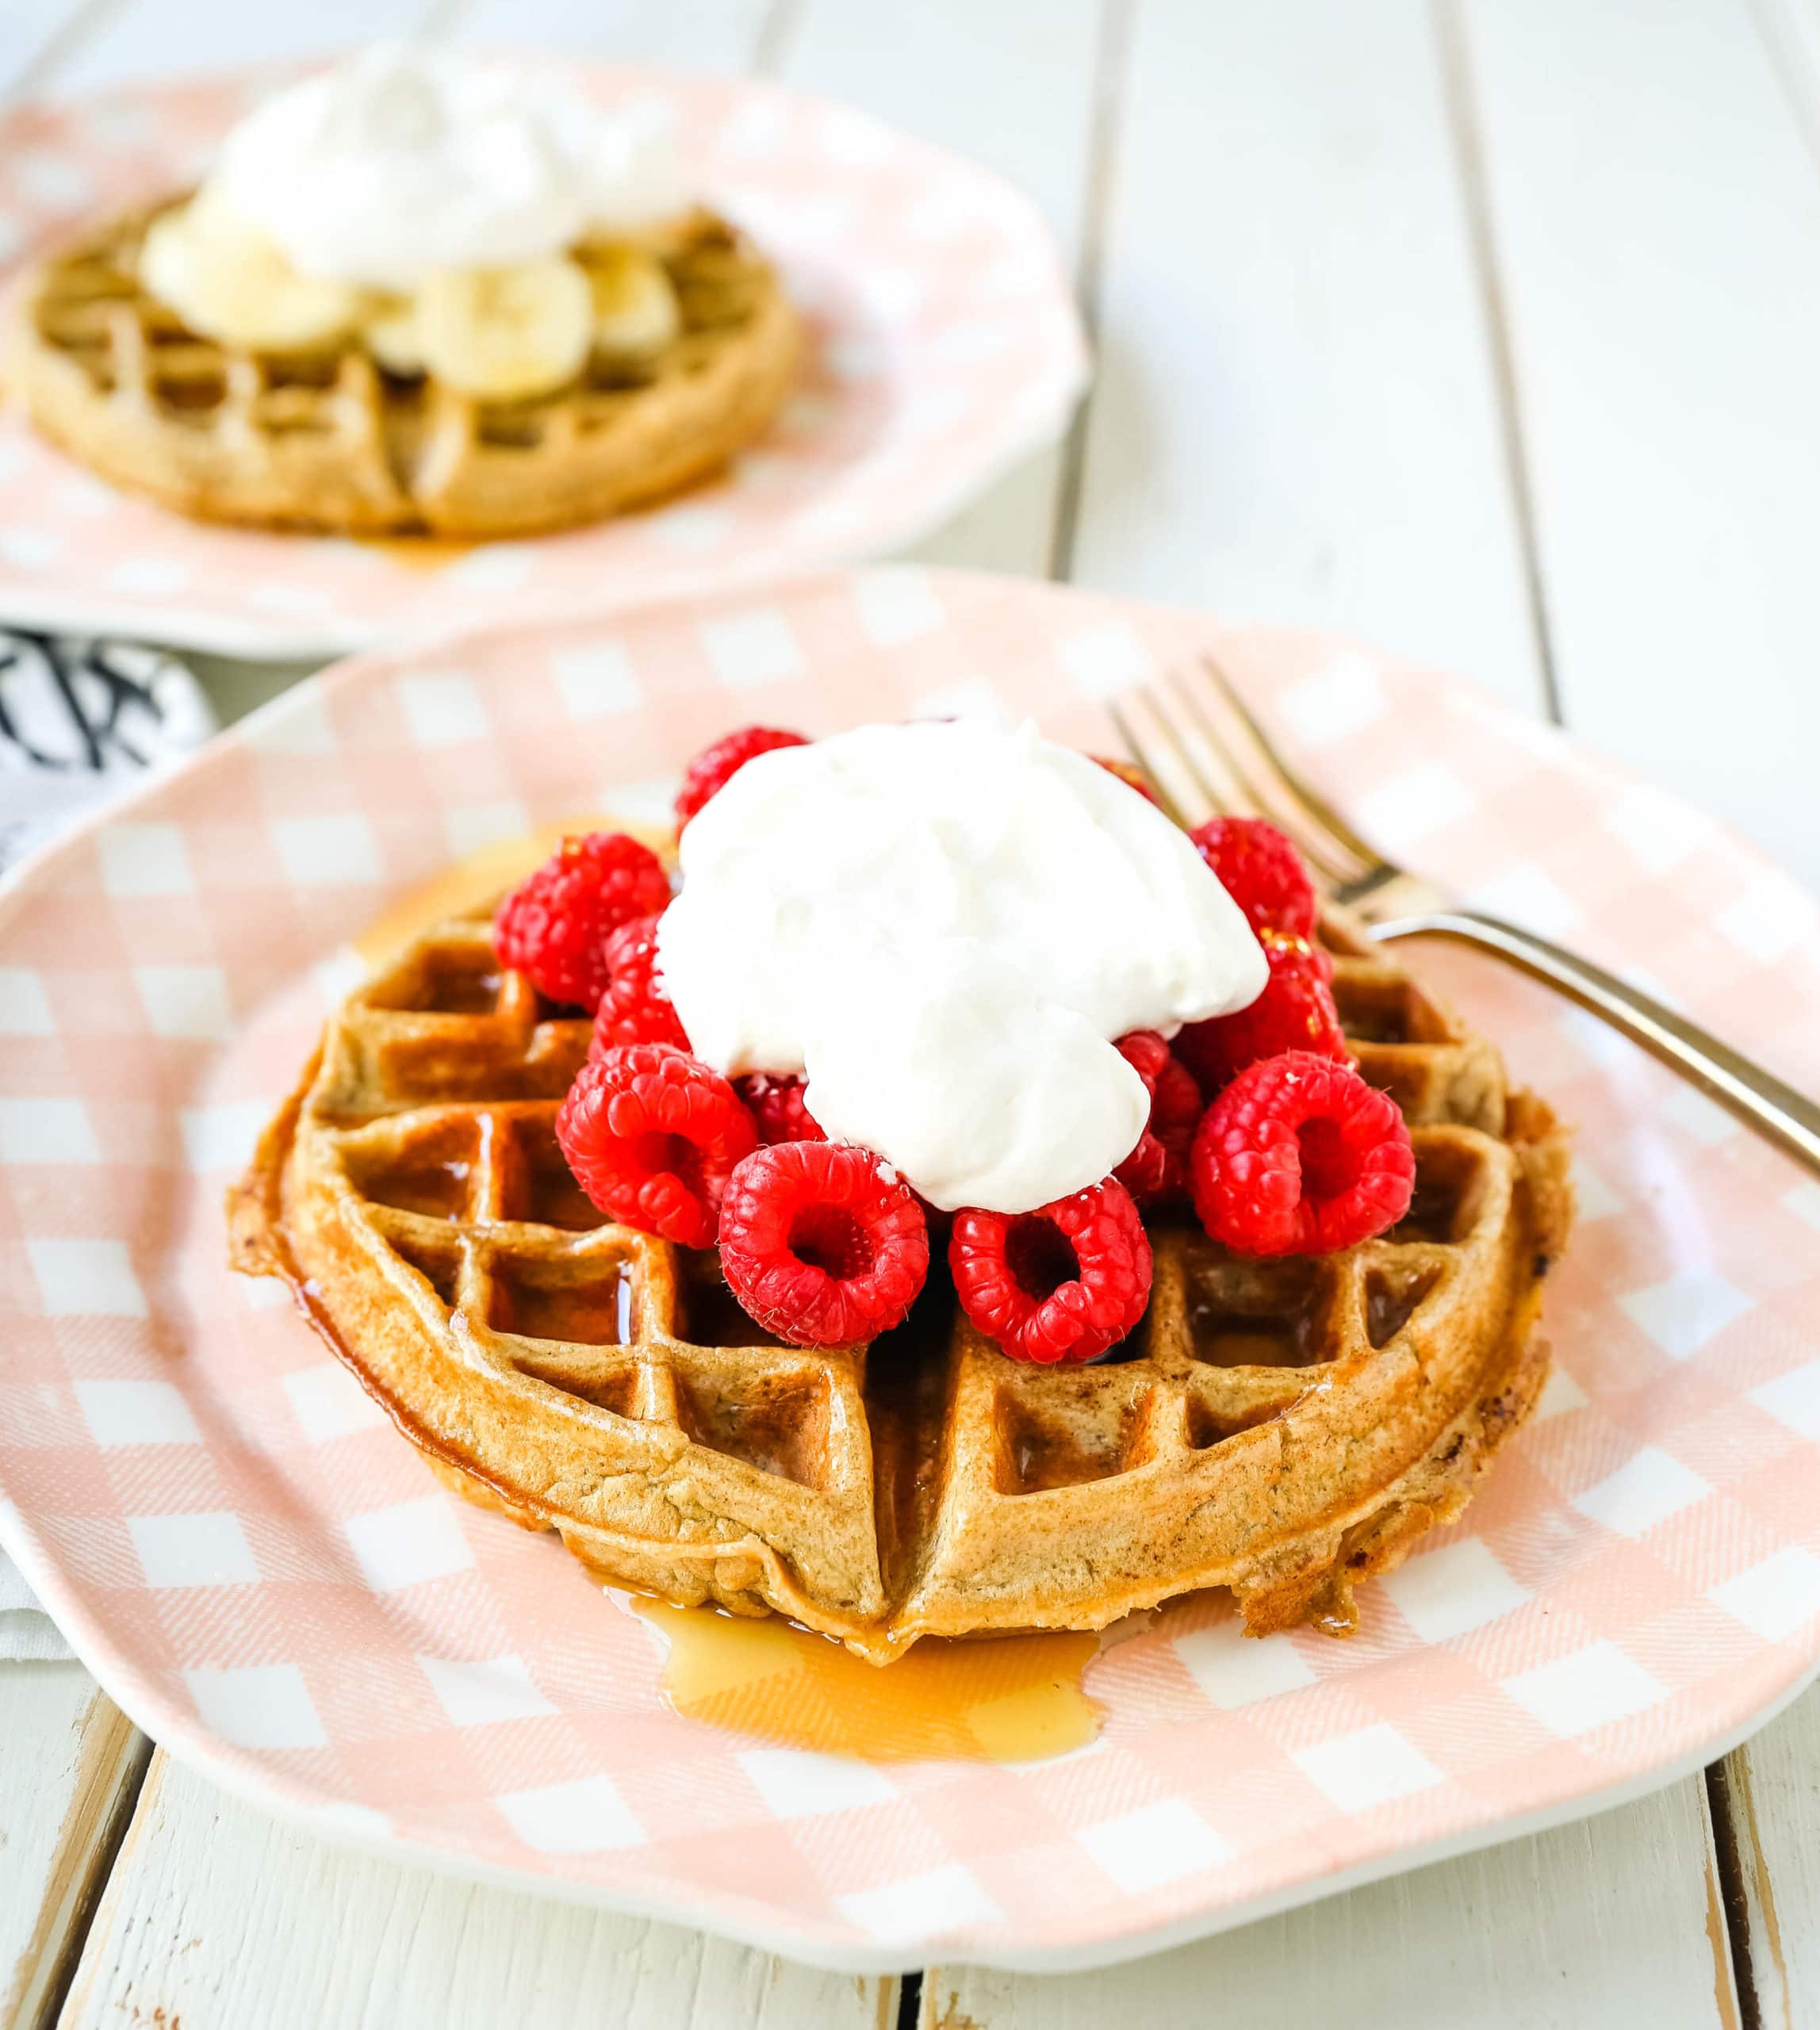 Healthy Gluten-Free Banana Oat Waffles Gluten-Free, Dairy-Free, and Refined-Sugar Free Waffles and you won't even miss it! These waffles give you the energy you need to start your day! #glutenfree #dairyfree #waffles #healthy #breakfast